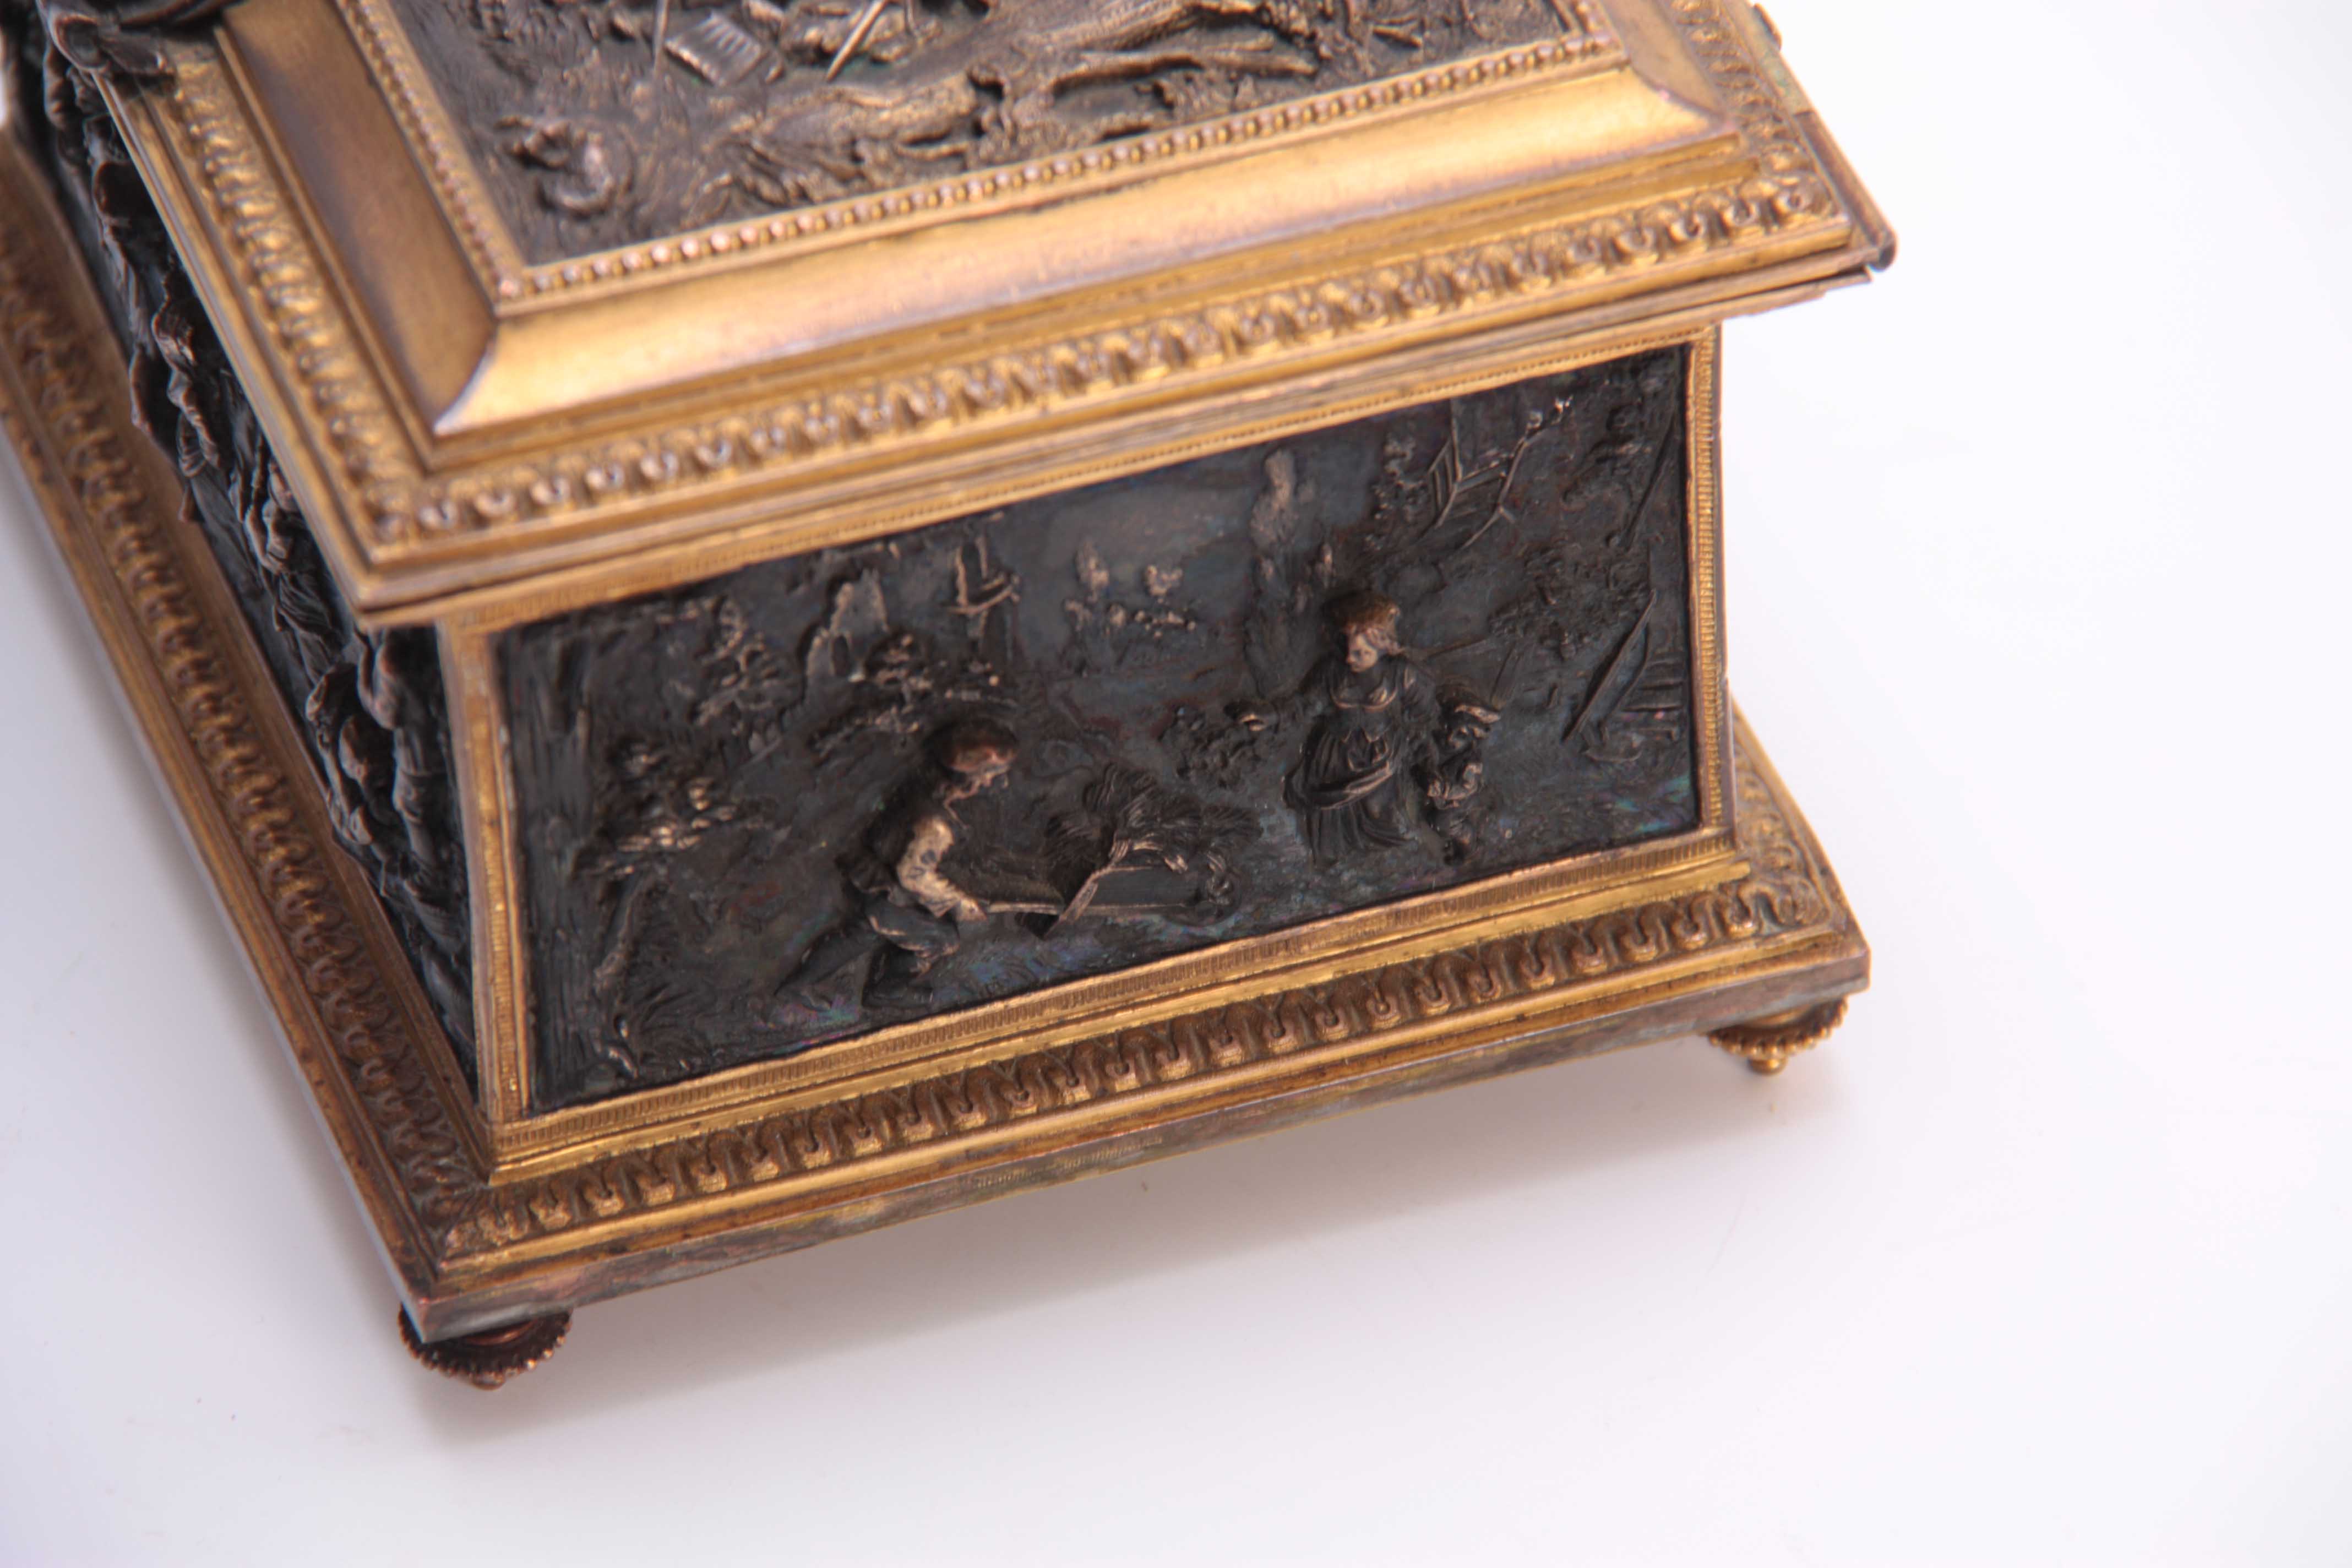 A LATE 19TH CENTURY CONTINENTAL GILT BRASS JEWELLERY CASKET set with cast bronzed figural panels - Image 5 of 9